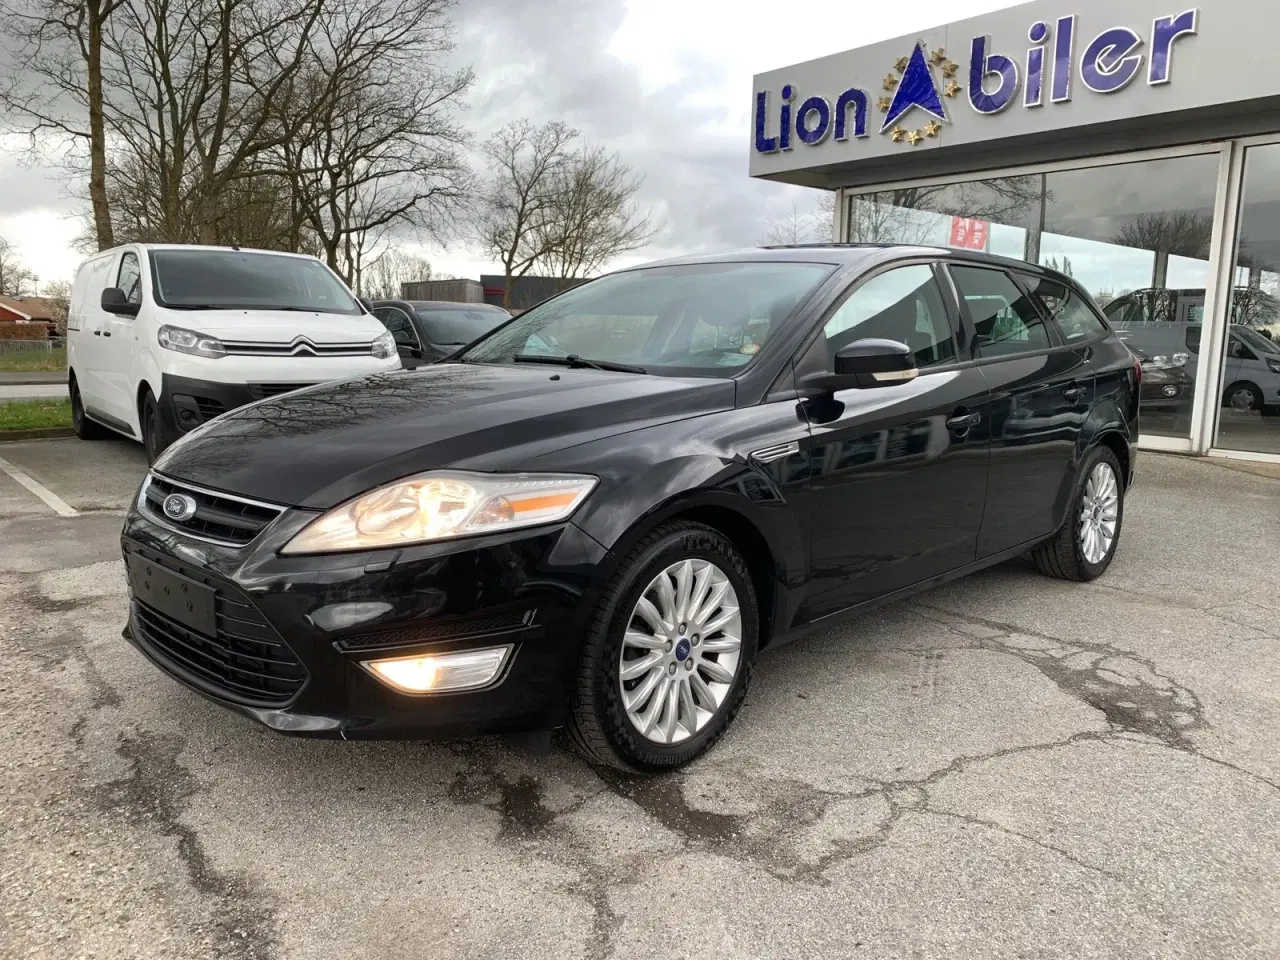 Billede 1 - Ford Mondeo 2,0 TDCi 140 Trend Collection stc.